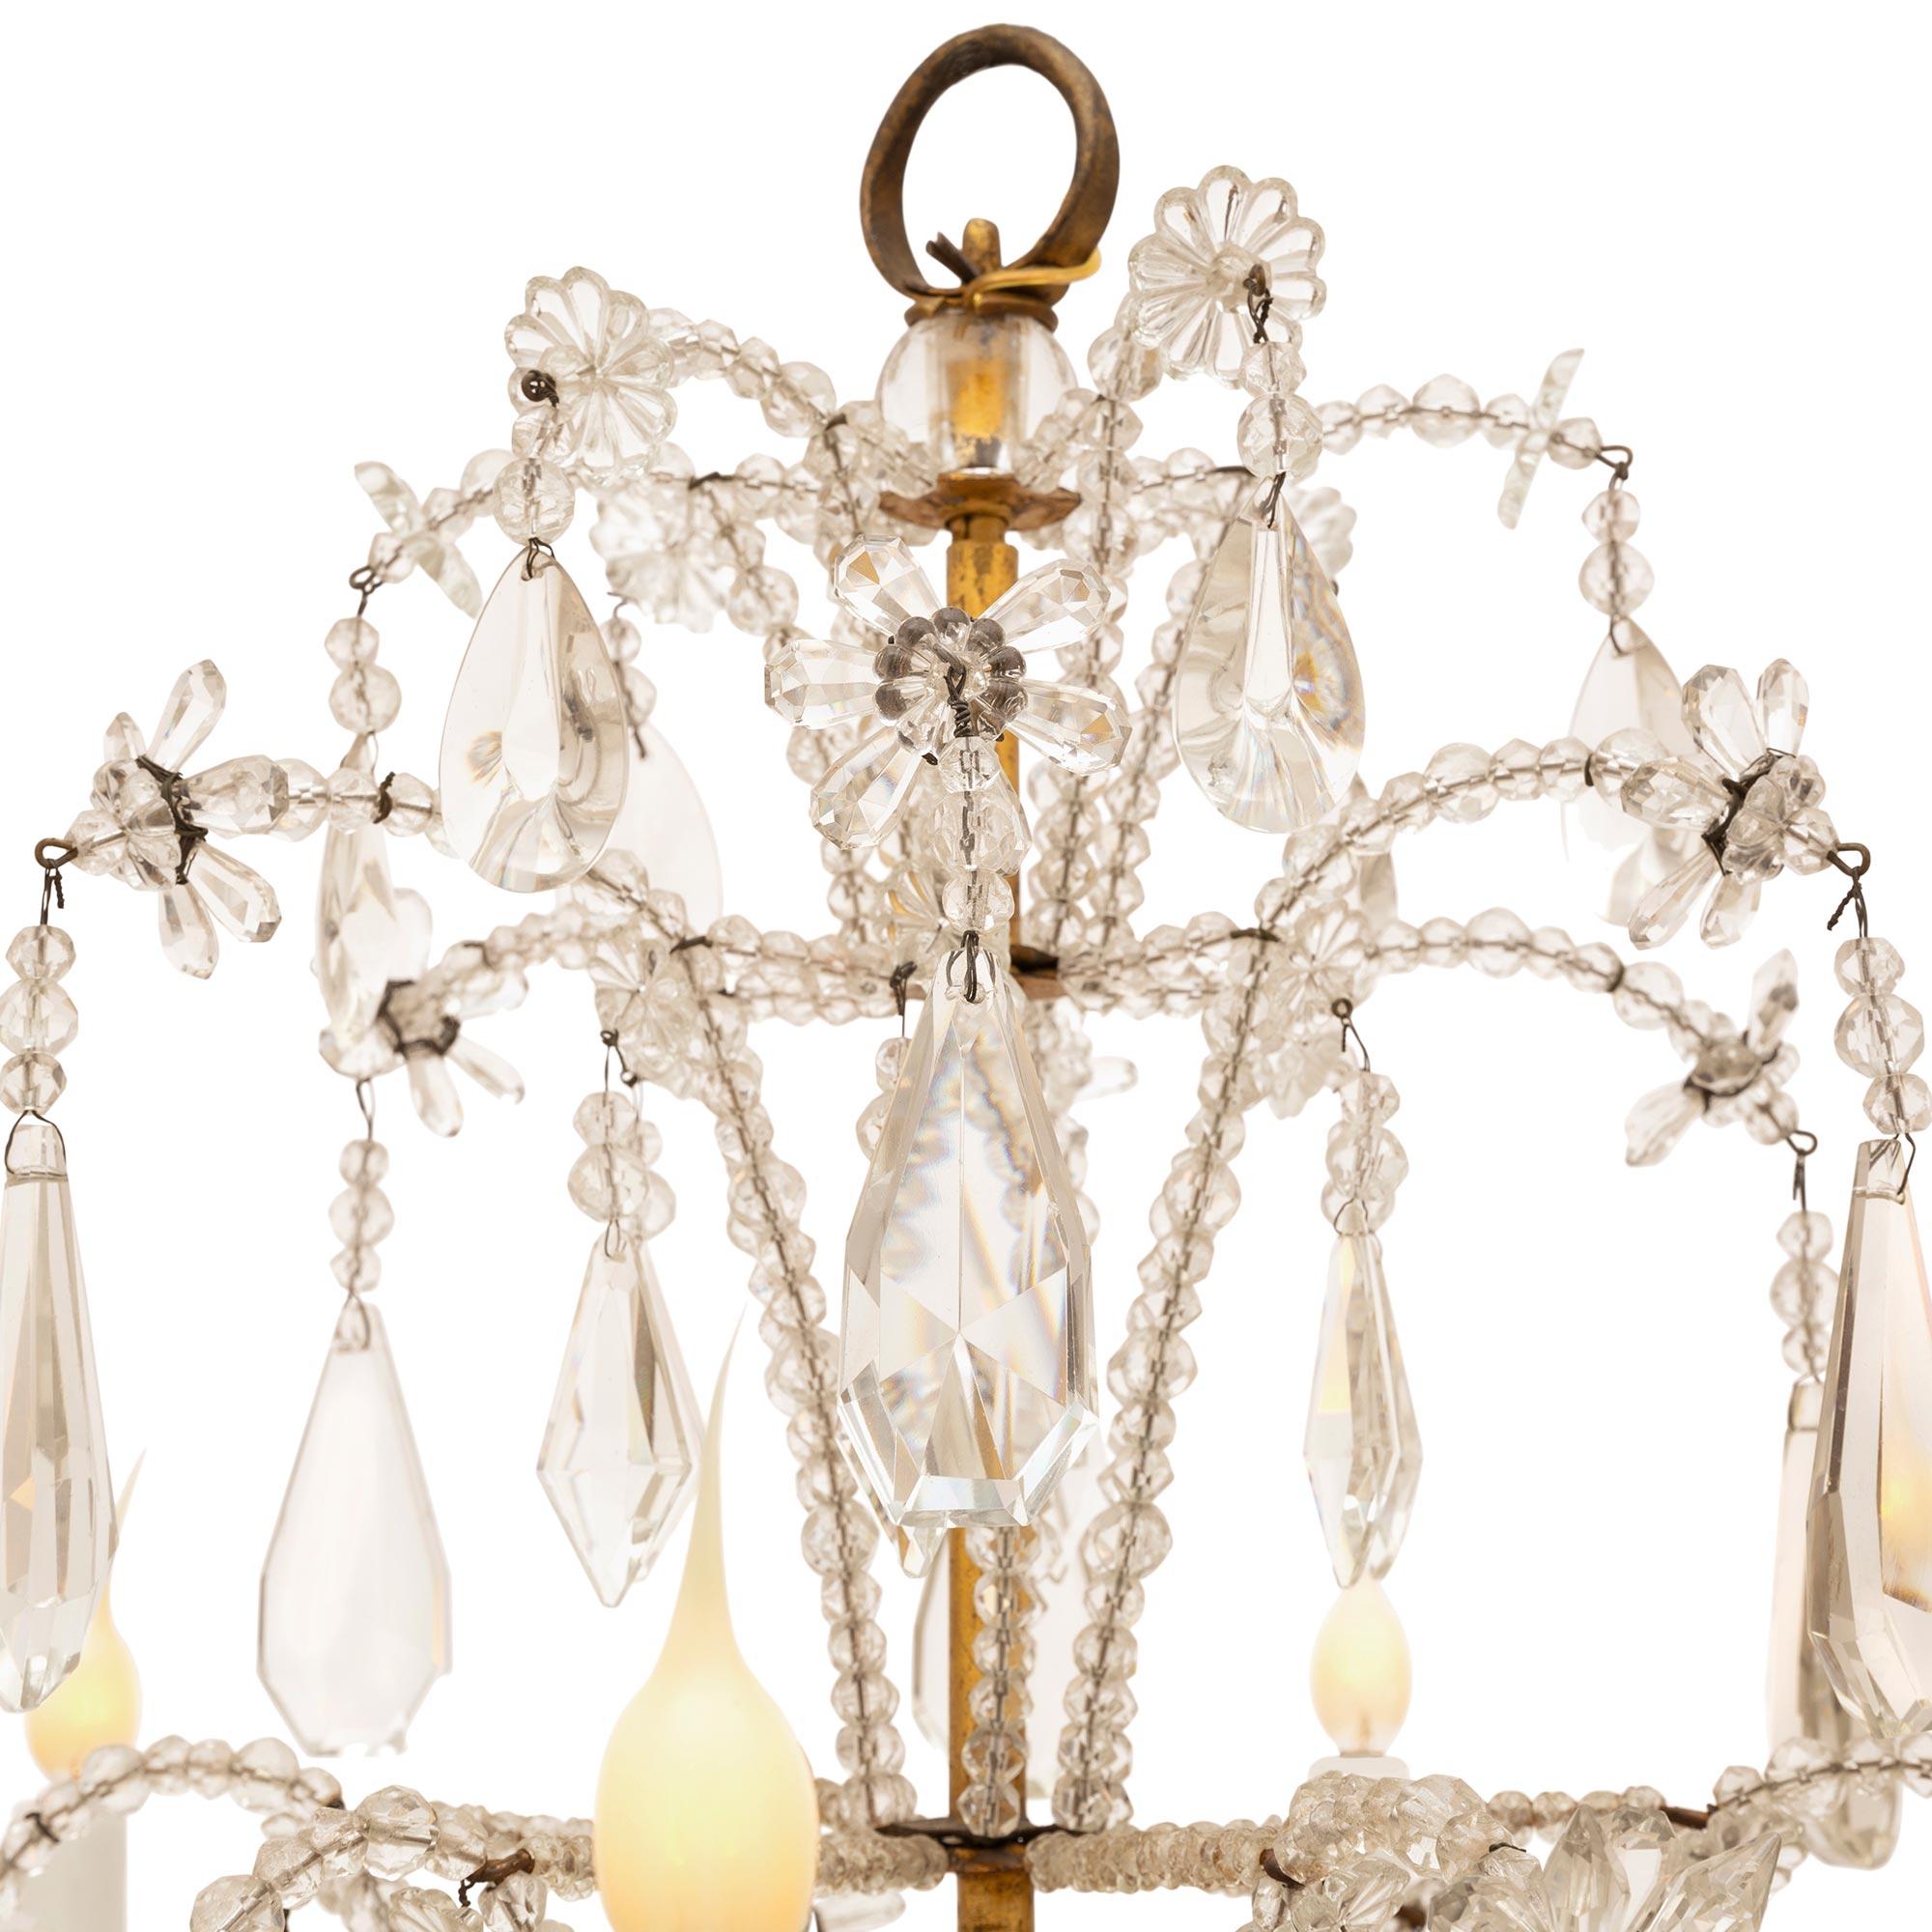 Italian Early 19th Century Crystal Chandelier from the Torino Region For Sale 1